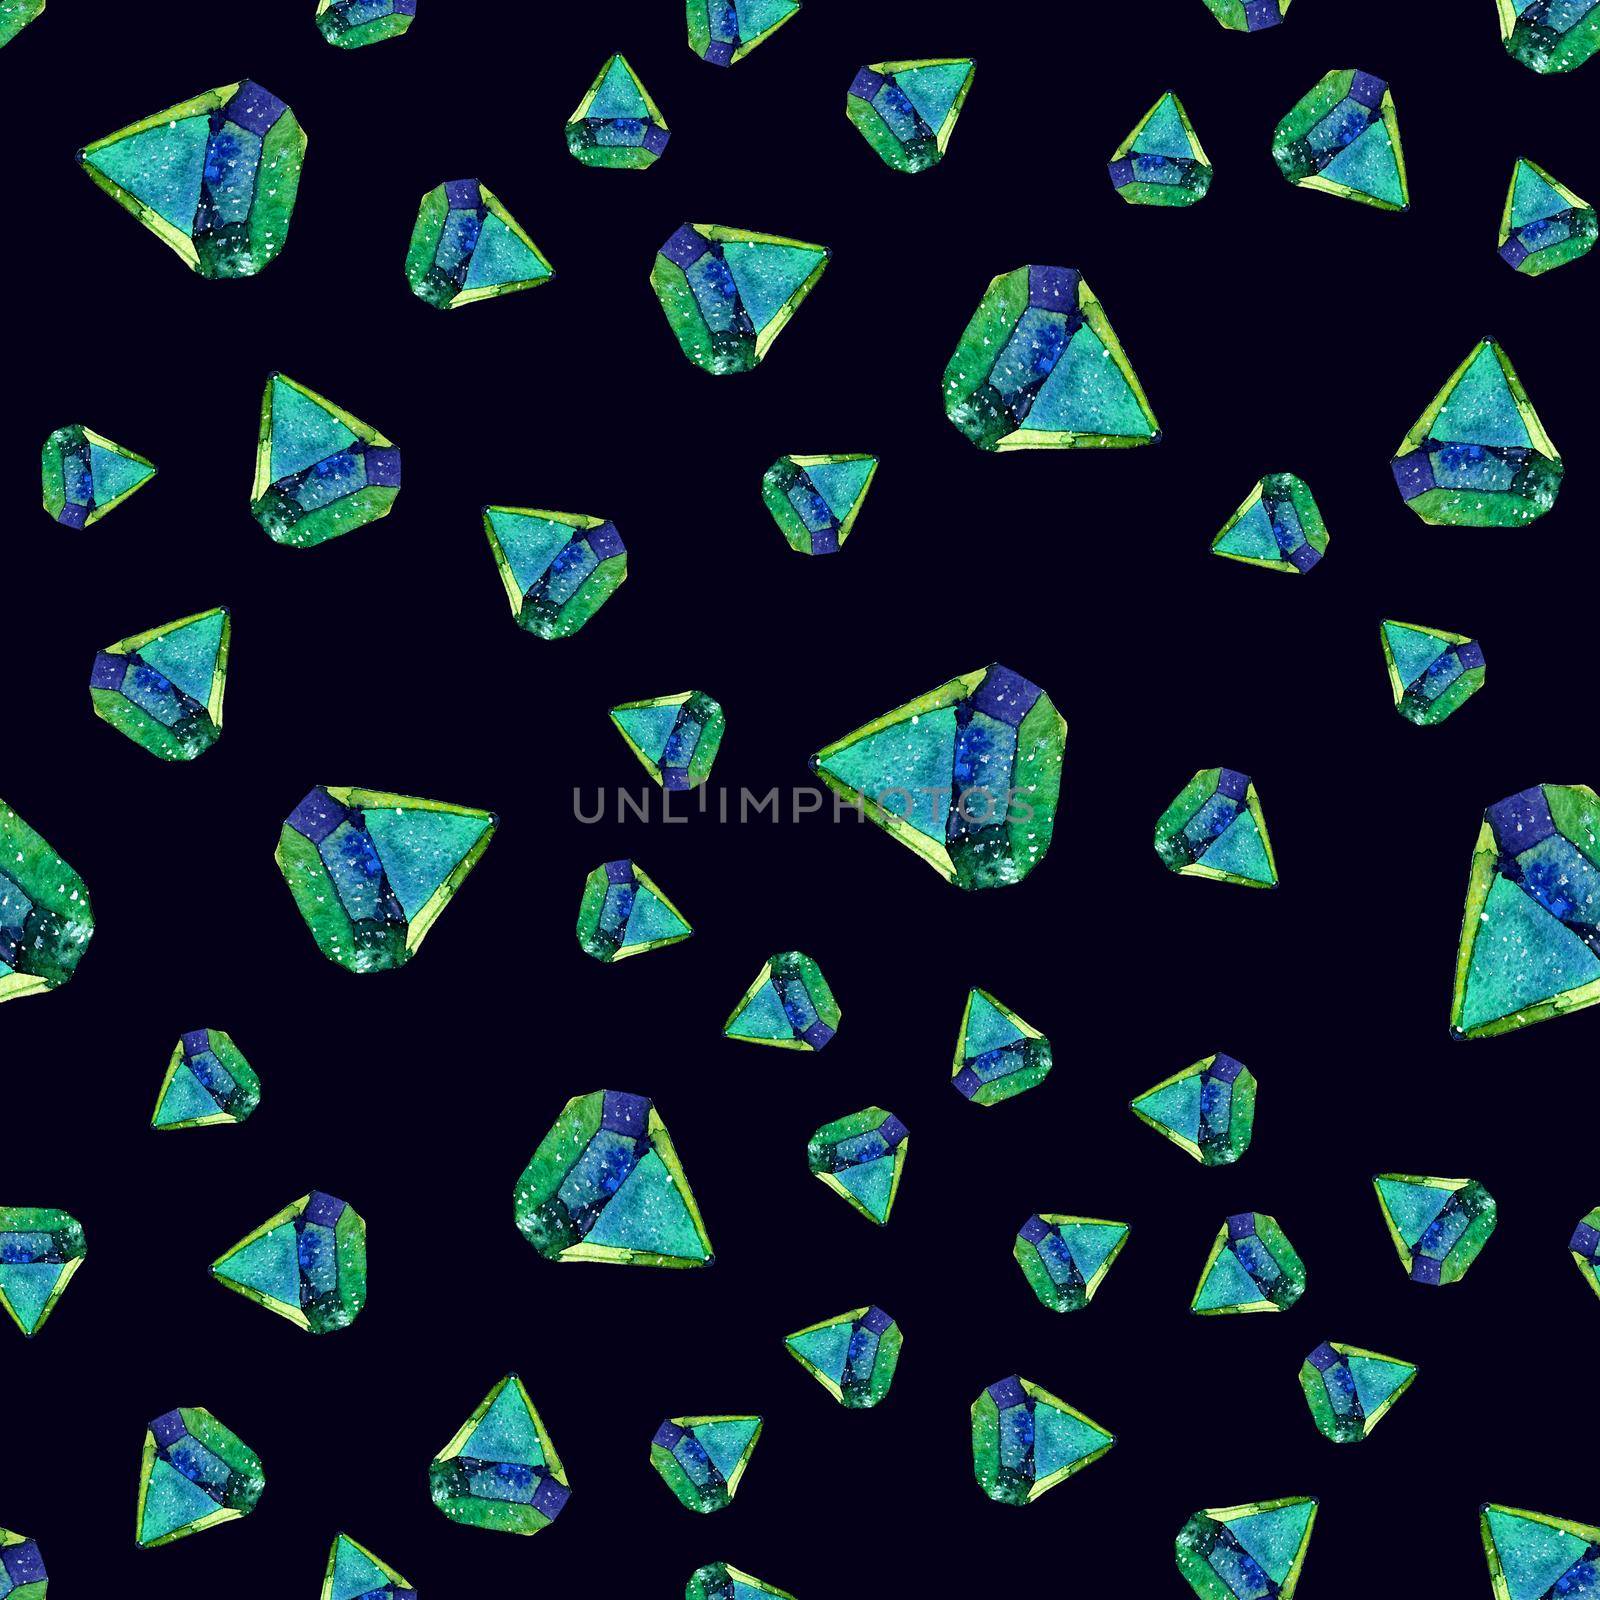 Watercolor illustration of diamond crystals - seamless pattern. Print for textile, fabric, wallpaper. Hand made painting. Jewel on dark background. Unusual modern ornate design. by DesignAB